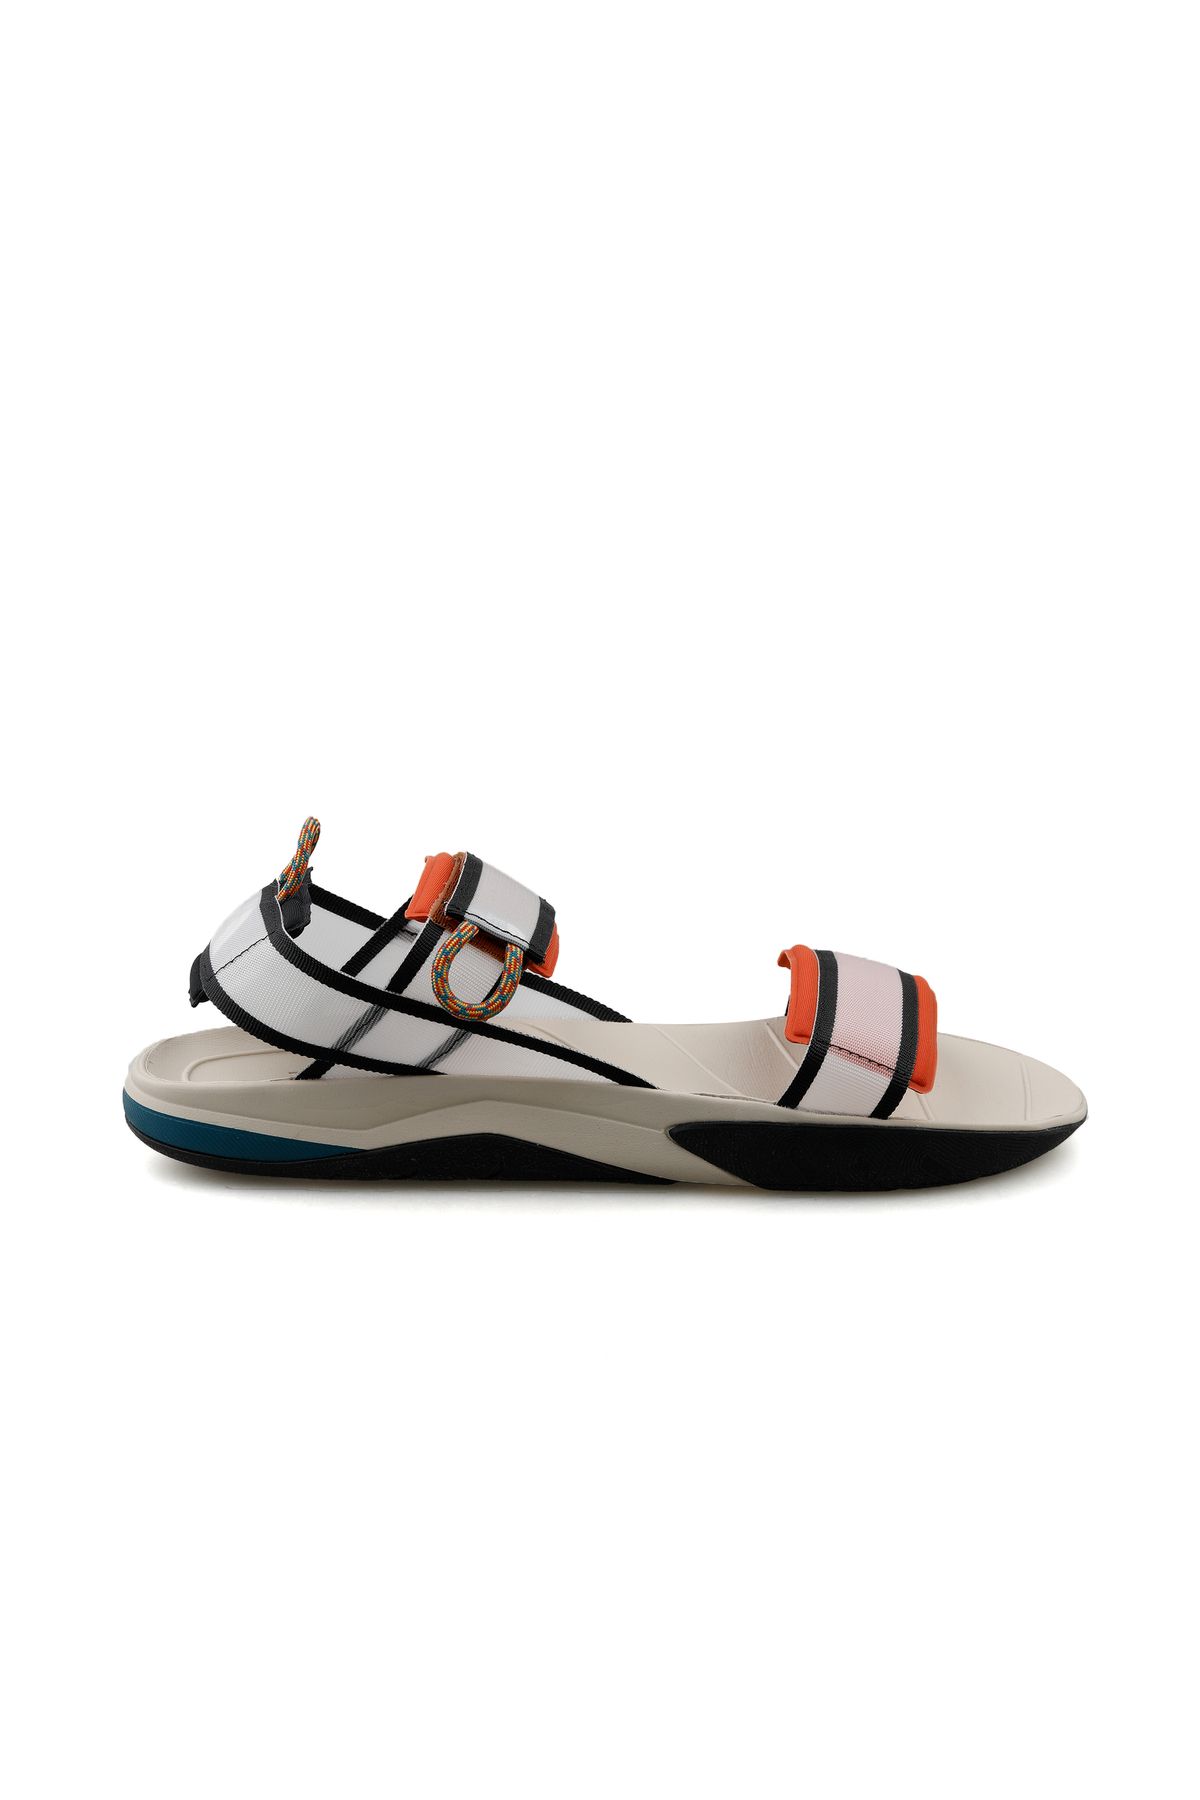 The North Face M Skeena Sport Sandal Sandals Daily رنگ